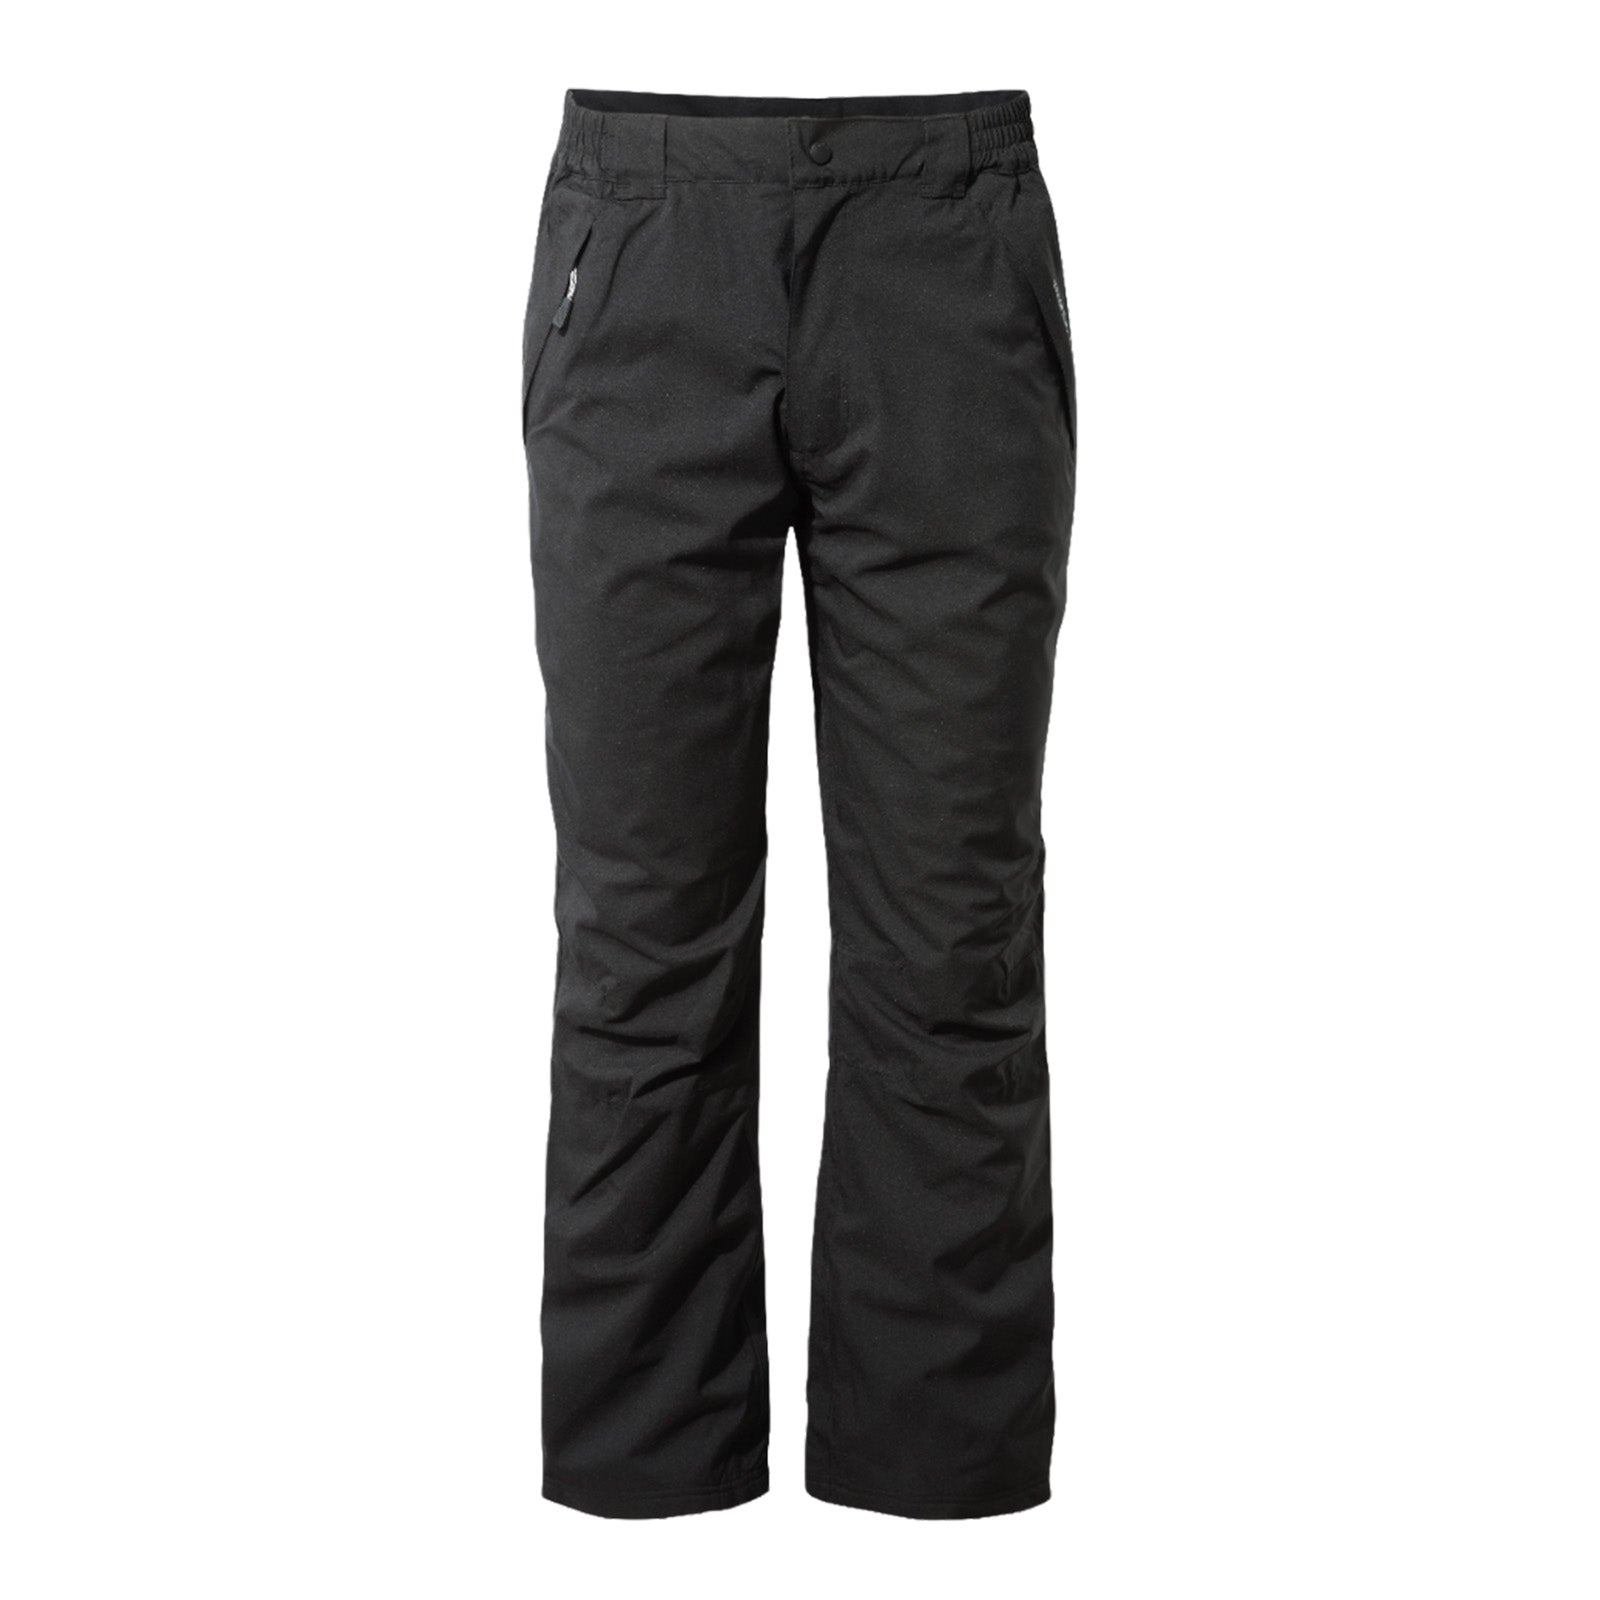 Craghoppers Mens Steall II Thermo Waterproof Trousers